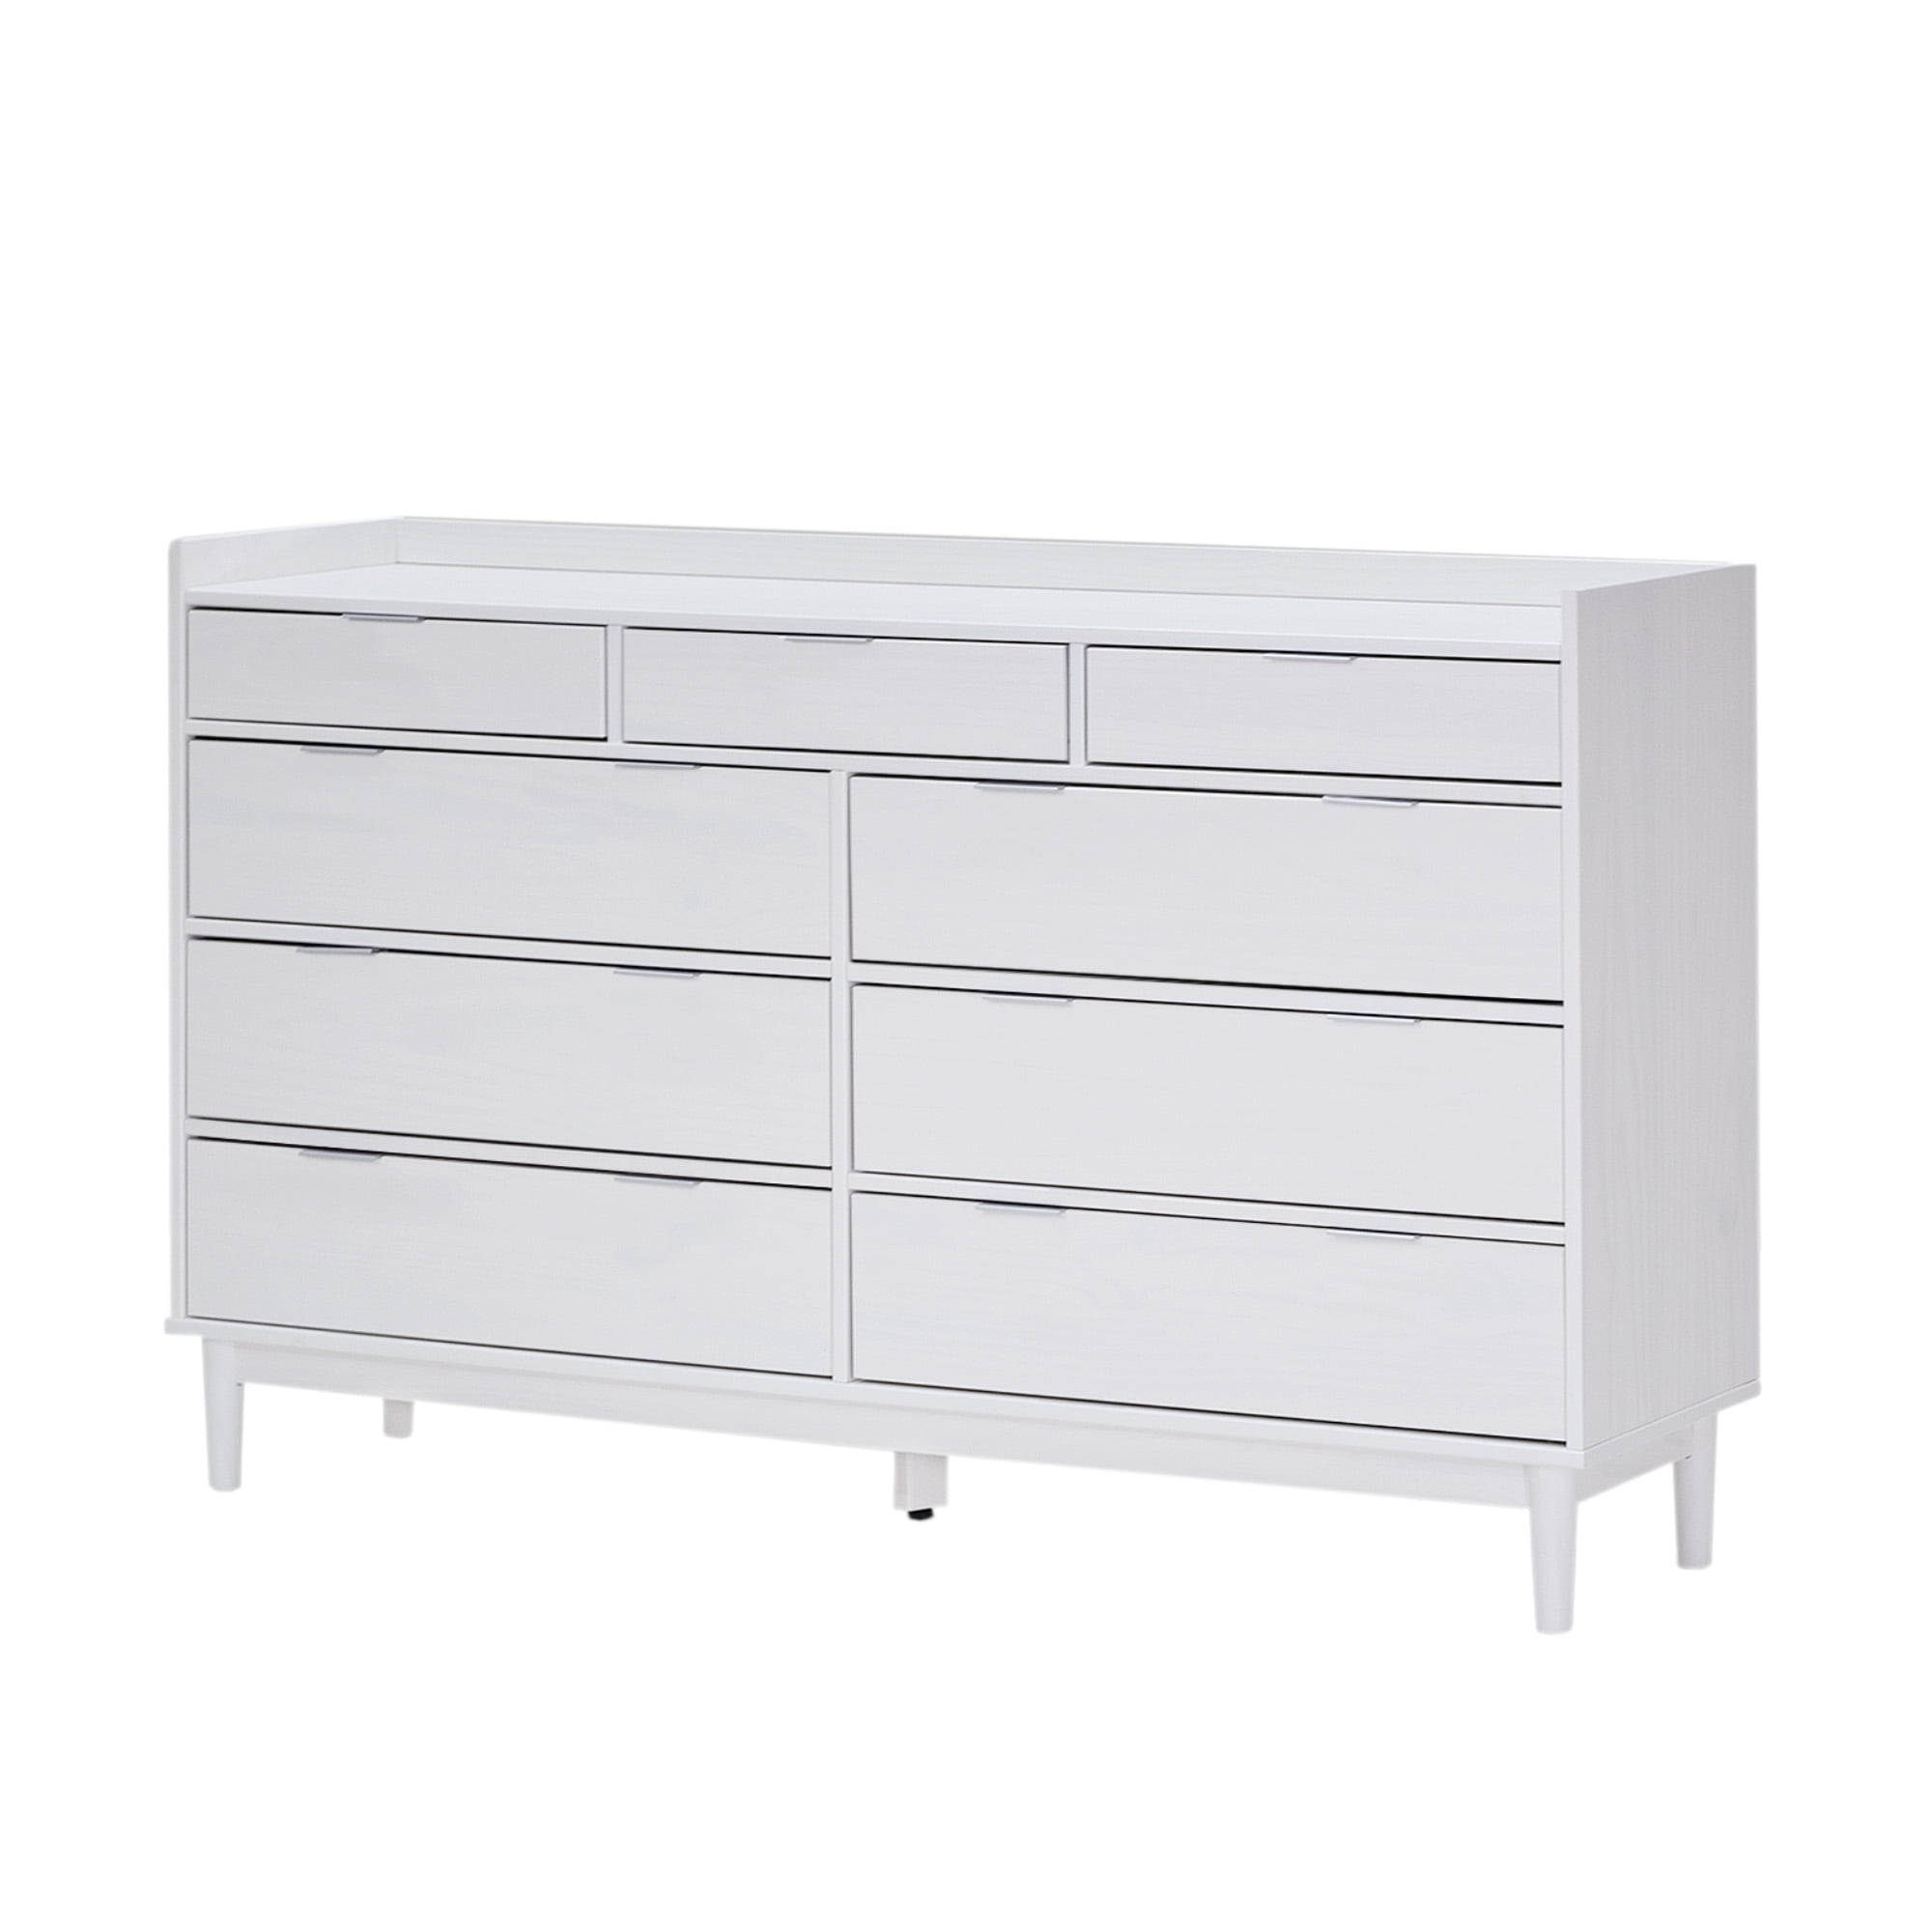 Solid white 2+3+4 drawer bedroom solid chunky furniture chest of drawers unit 